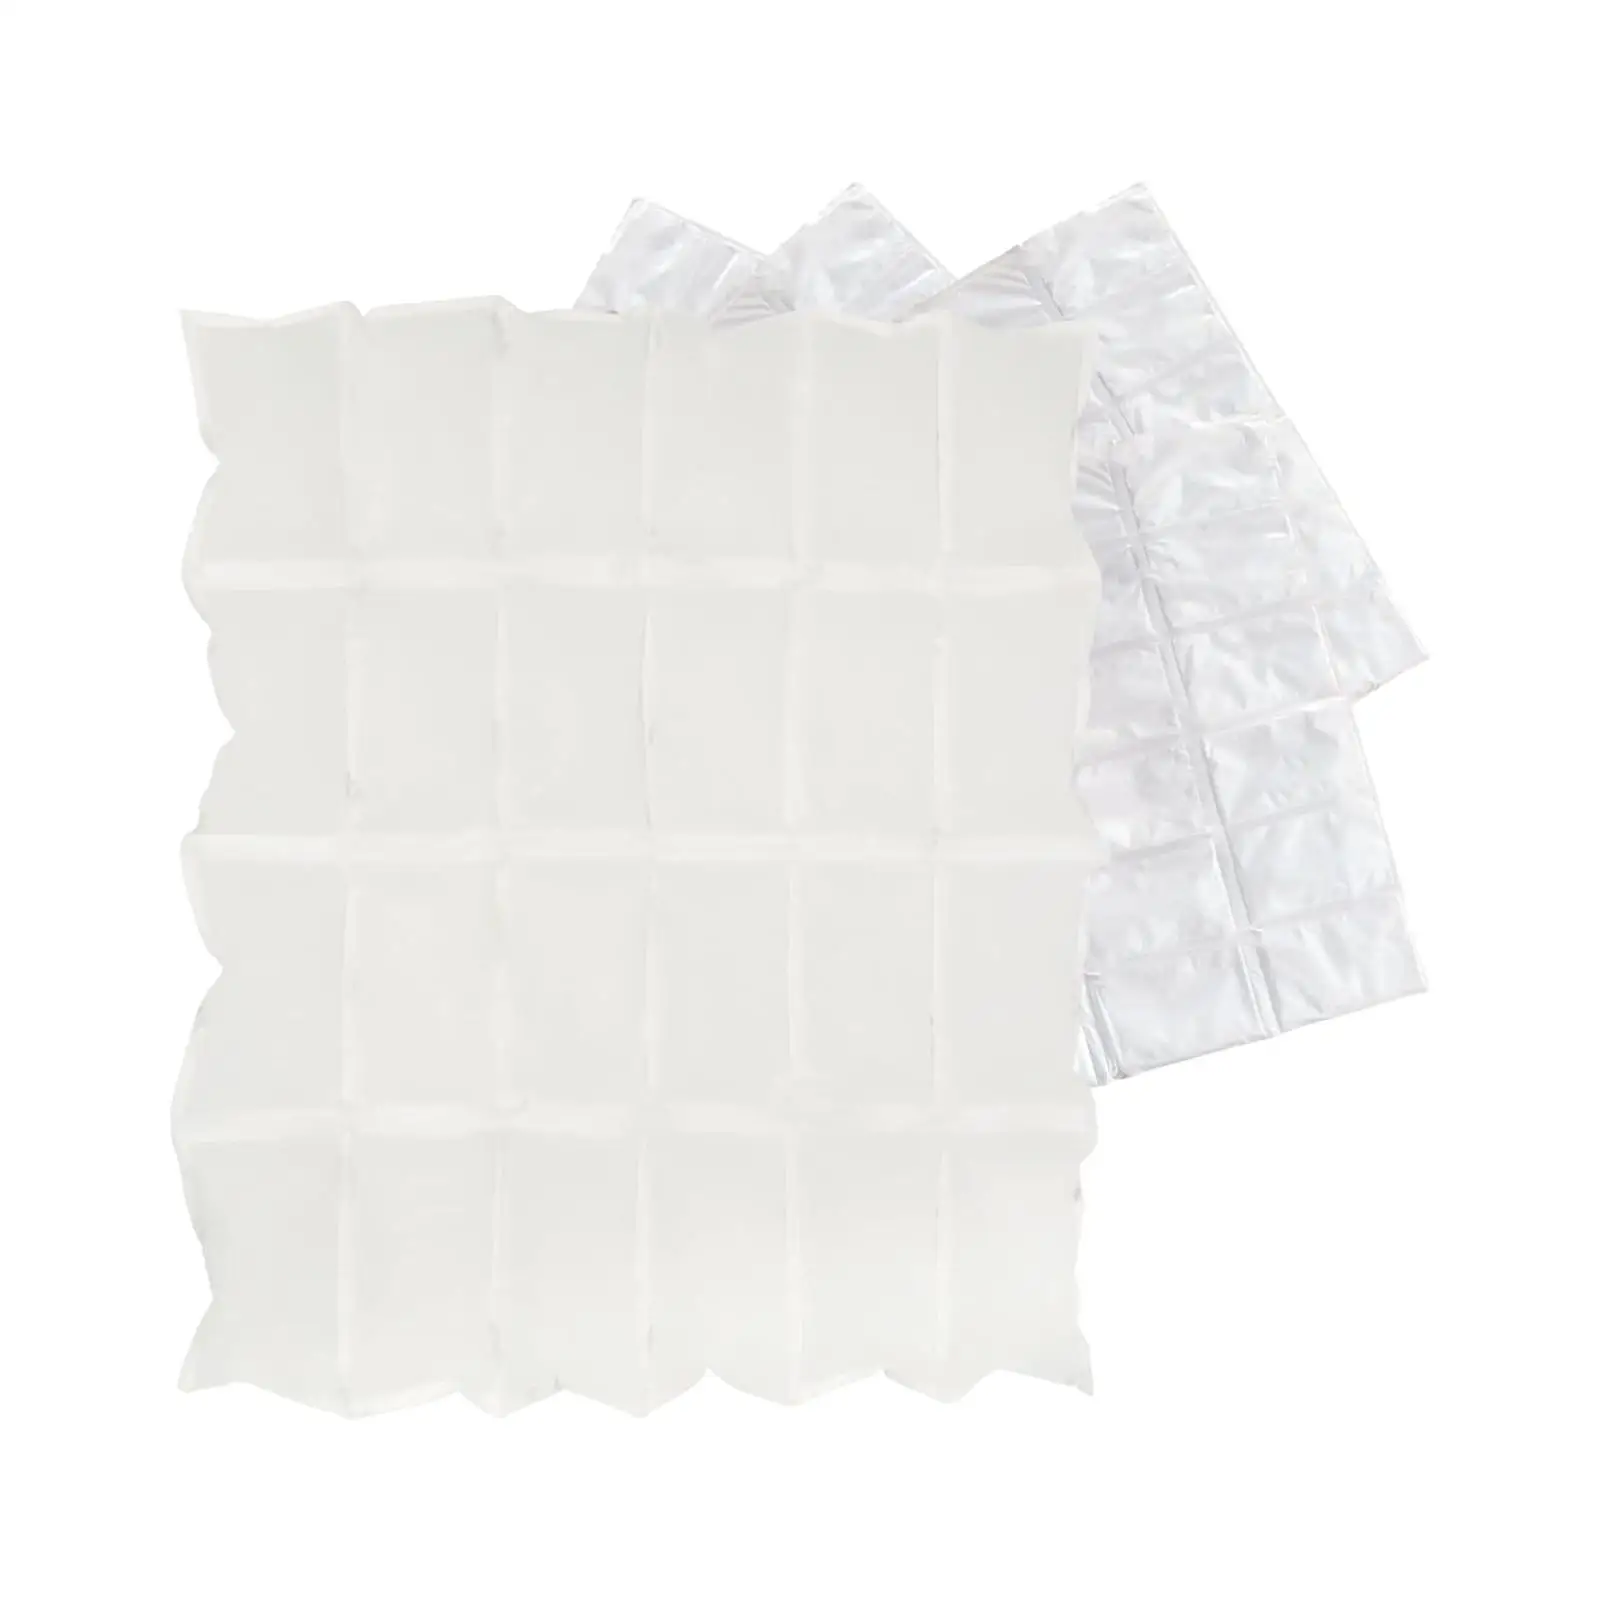 120Pcs Ice Packs Ice Pack Sheets for Coolers Refrigerate Food Lunch Bags